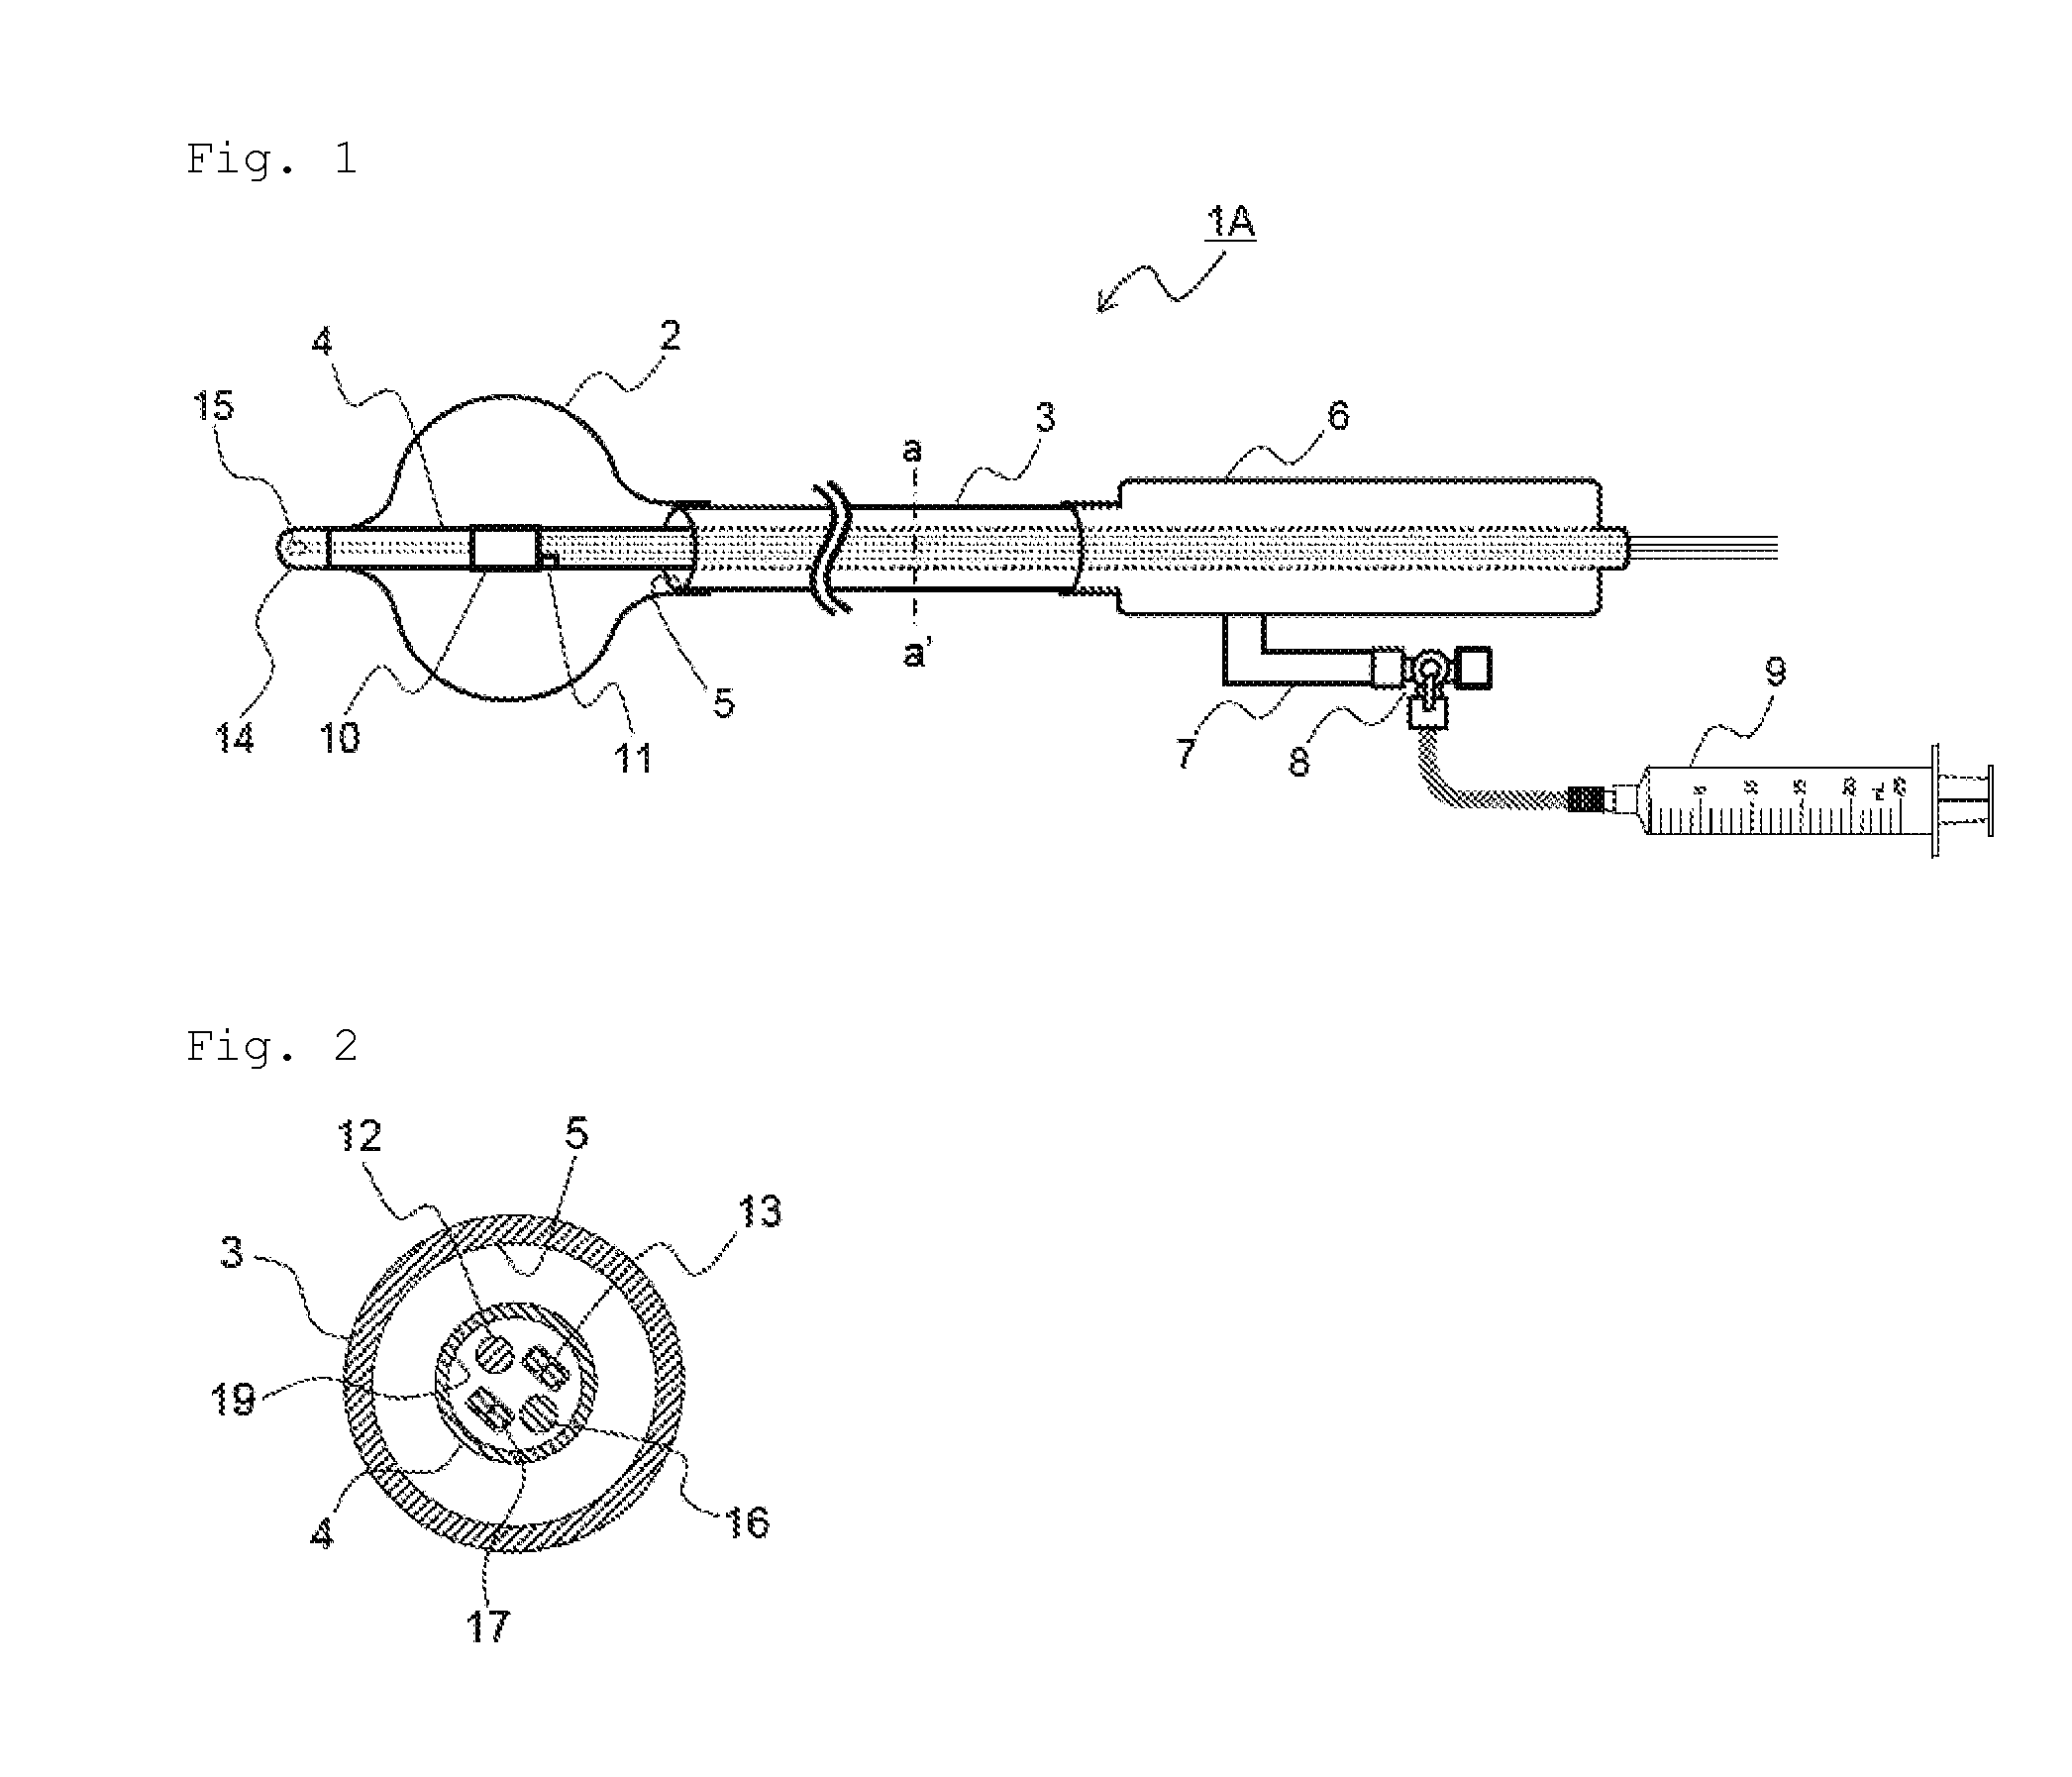 Ablation catheter with balloon and ablation catheter system with balloon